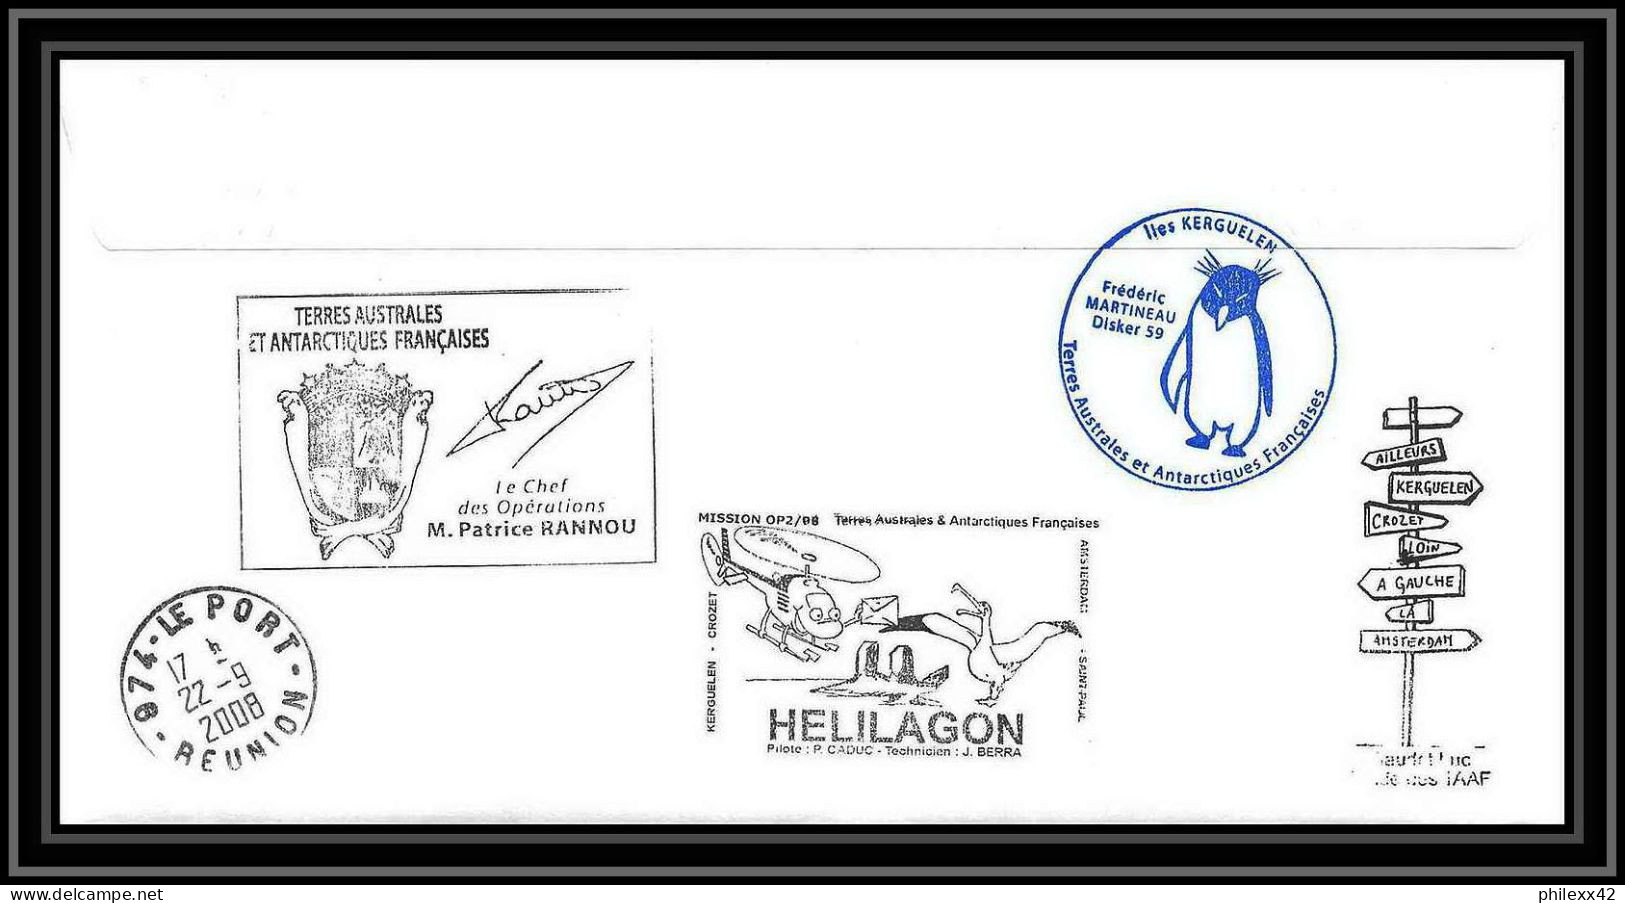 2830 Helilagon Terres Australes TAAF Lettre Dufresne 2 Signé Signed Op 2008/2 KERGUELEN 1/9/2008 N°500 Recommandé - Helicopters